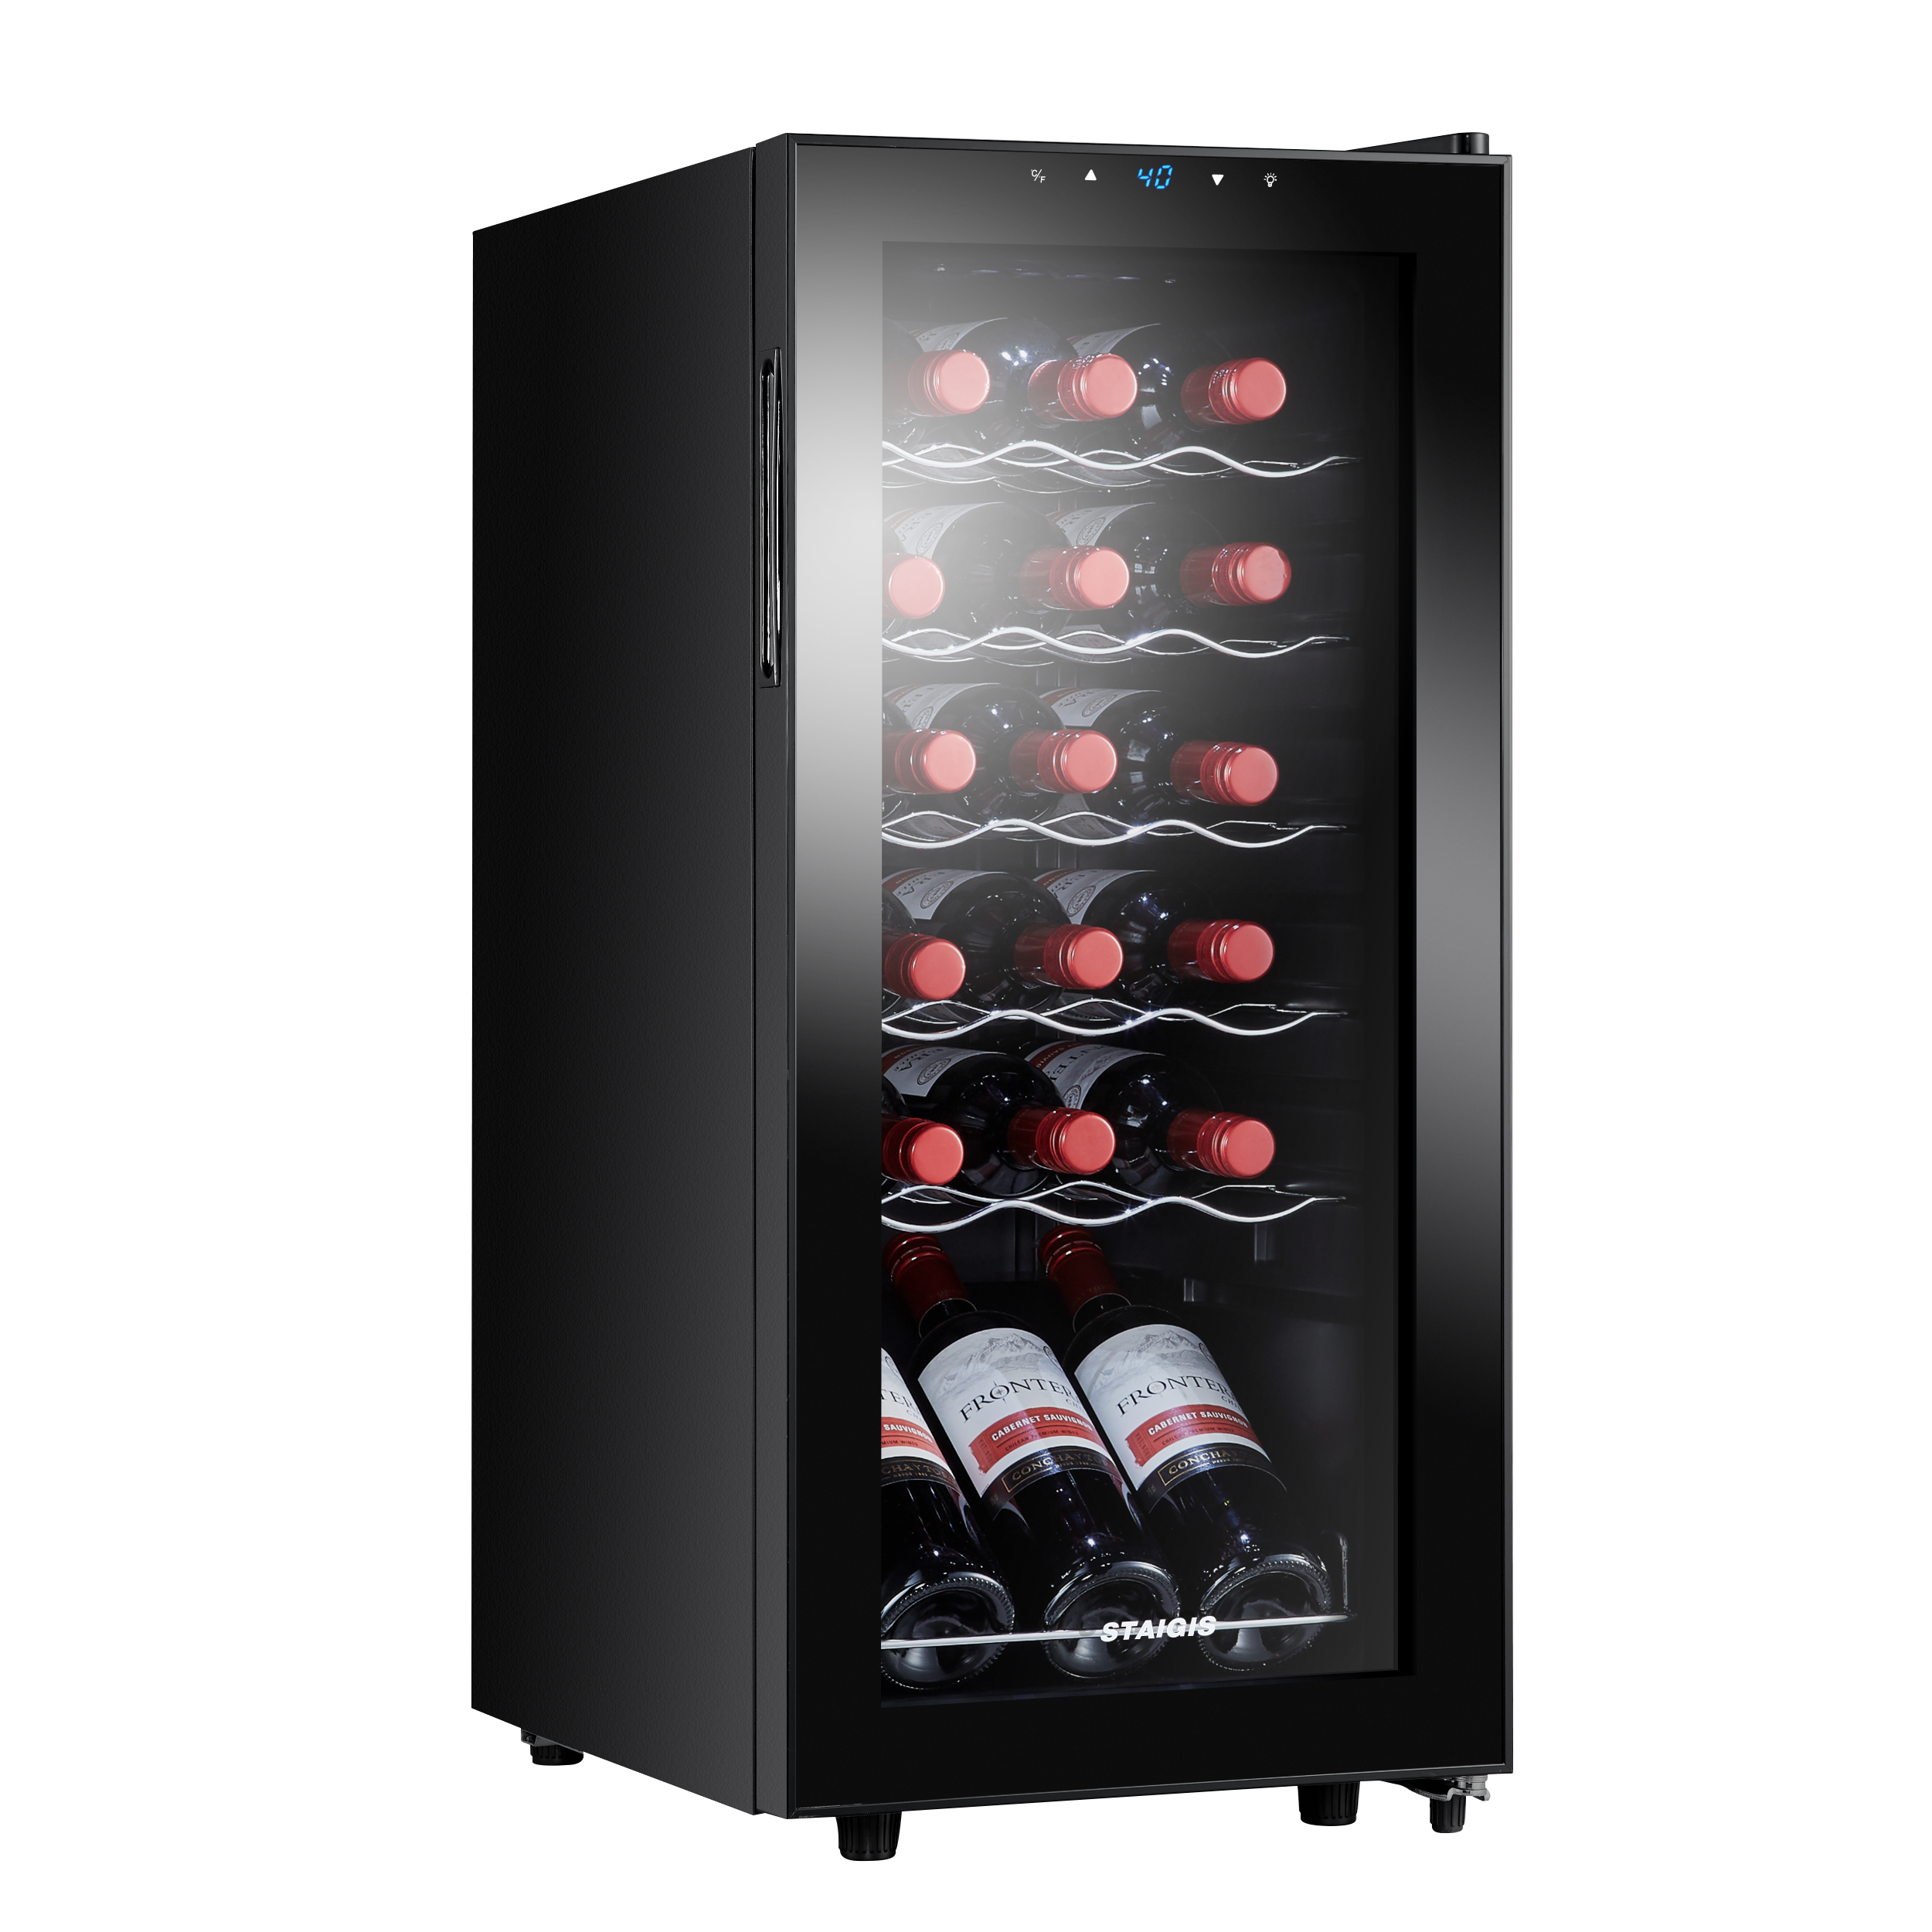 STAIGIS Beverage Refrigerator, 1.6 Cu.ft Mini Fridge w/ 45 Can Capacity,  Small Beverage Cooler for Home - Freestanding, Glass Door